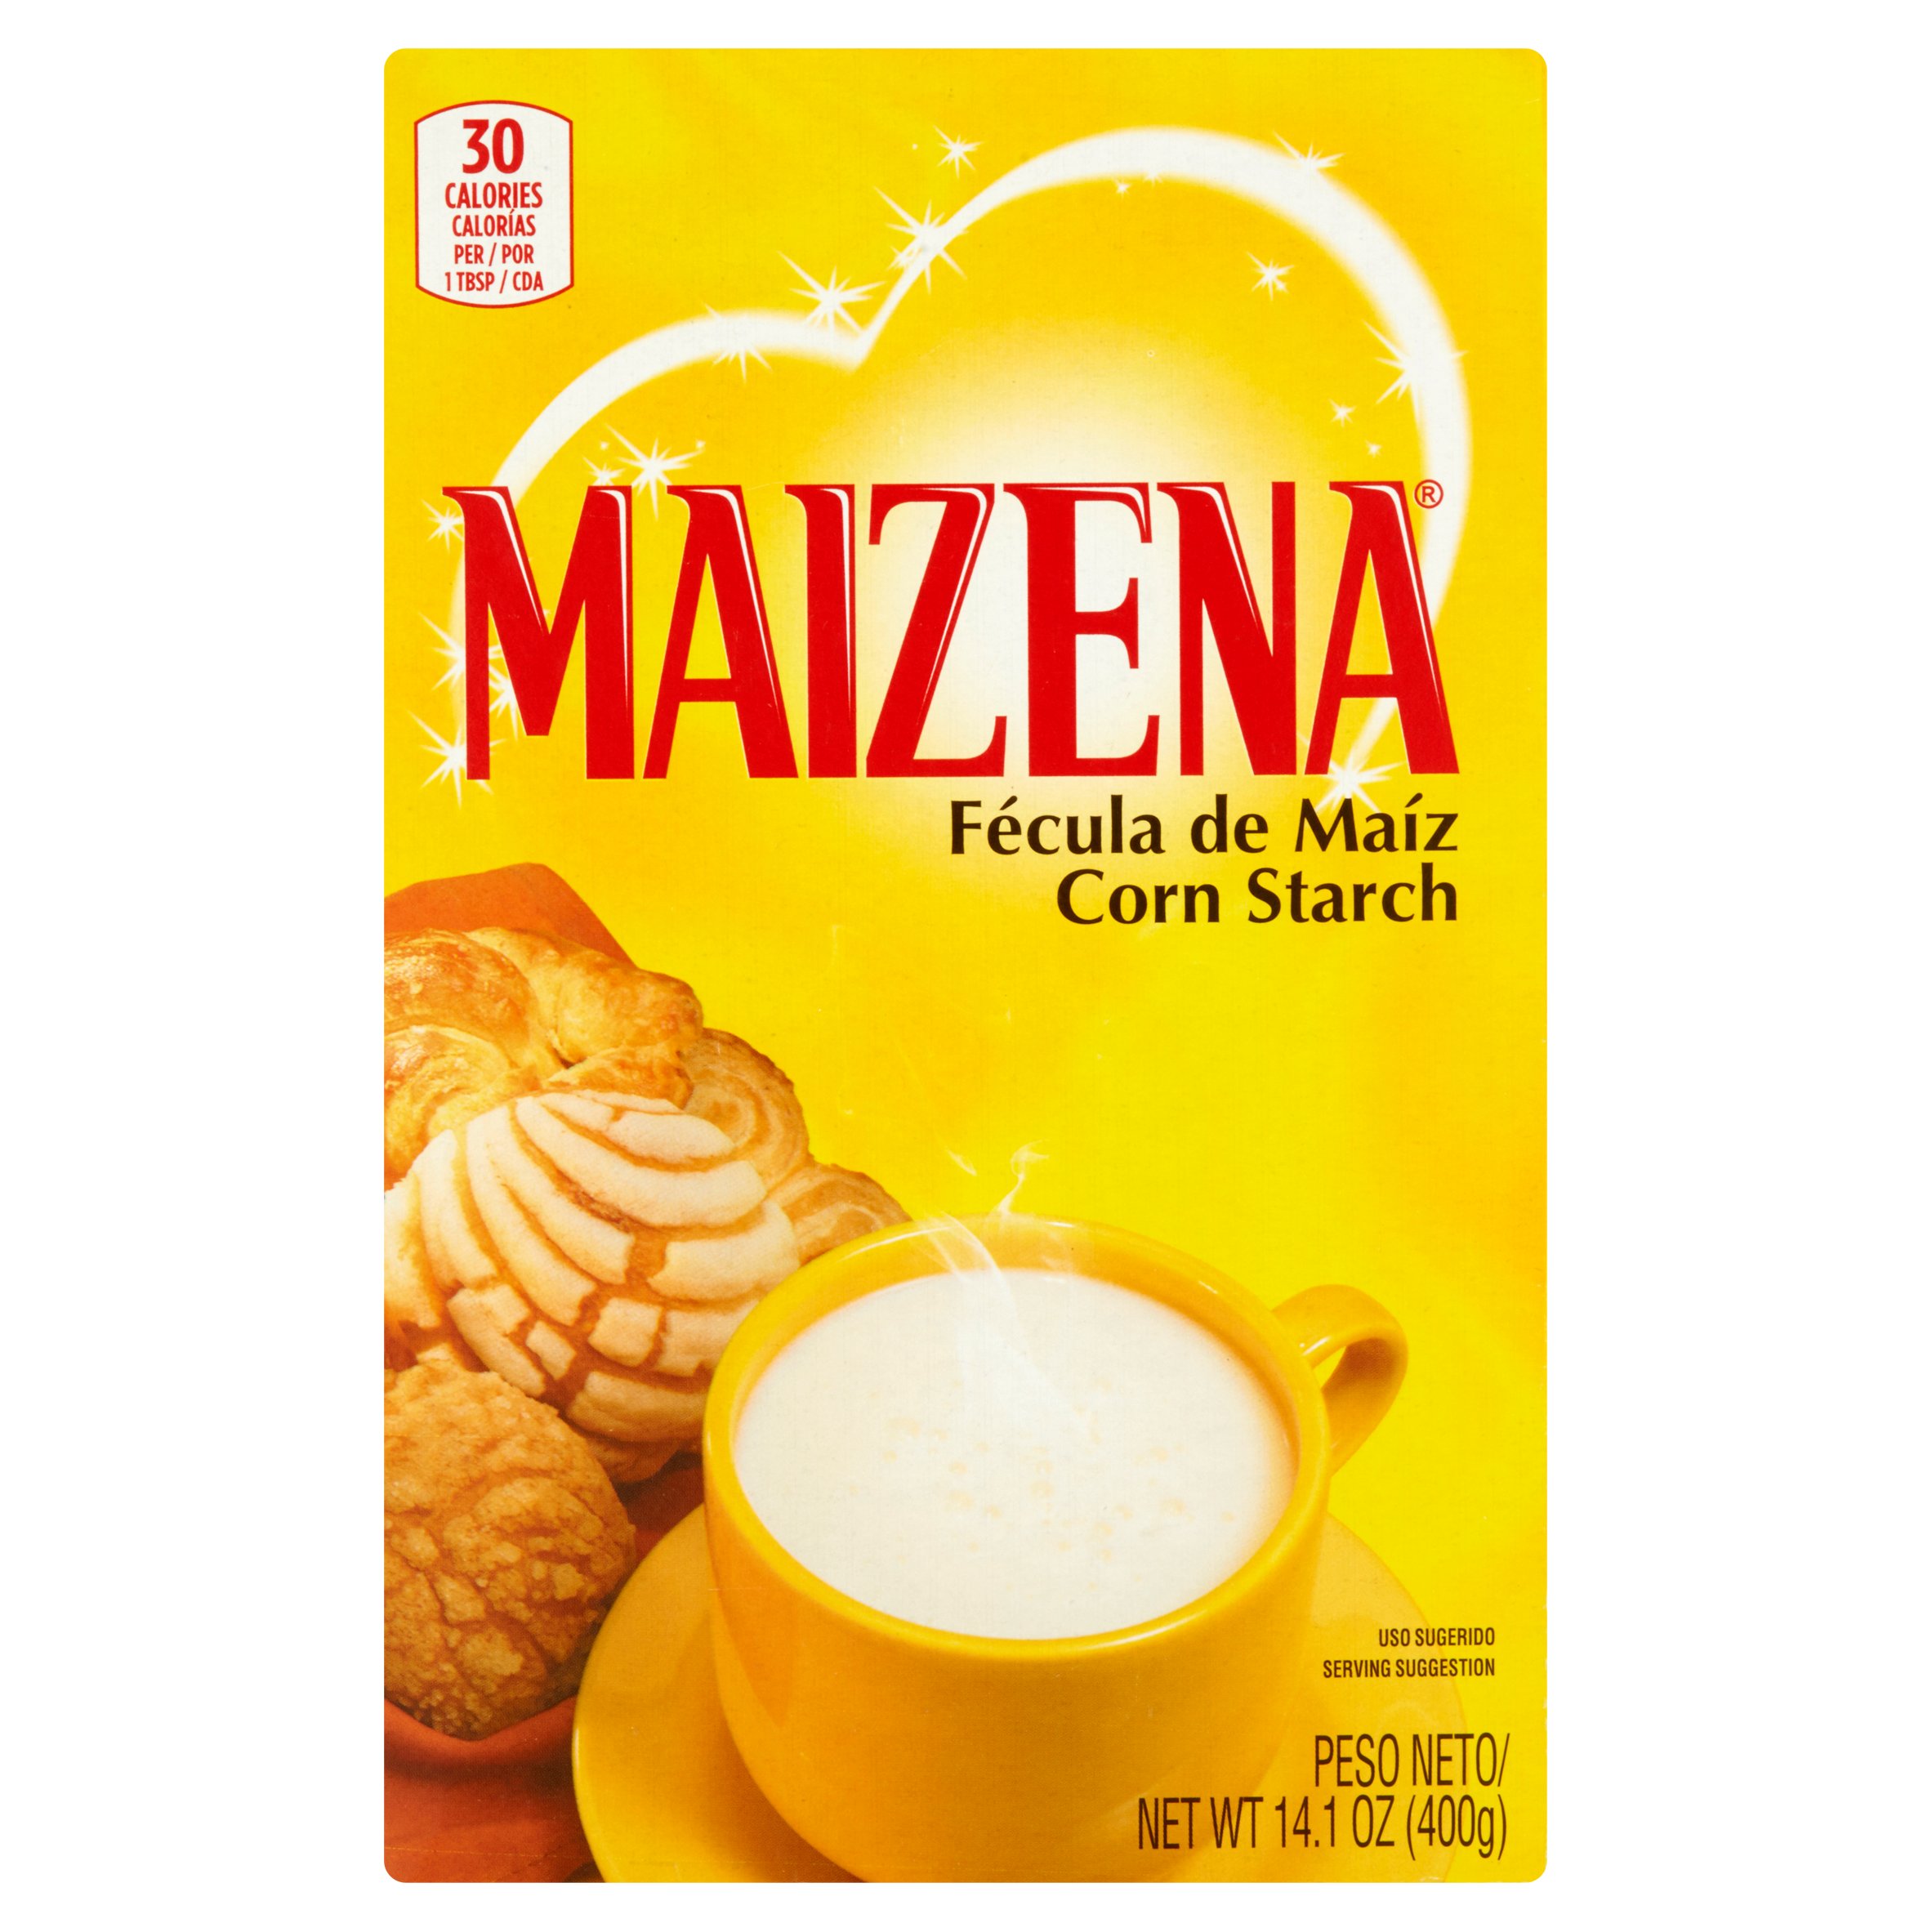 Maizena is used to make delicious beverage known as Atole. 